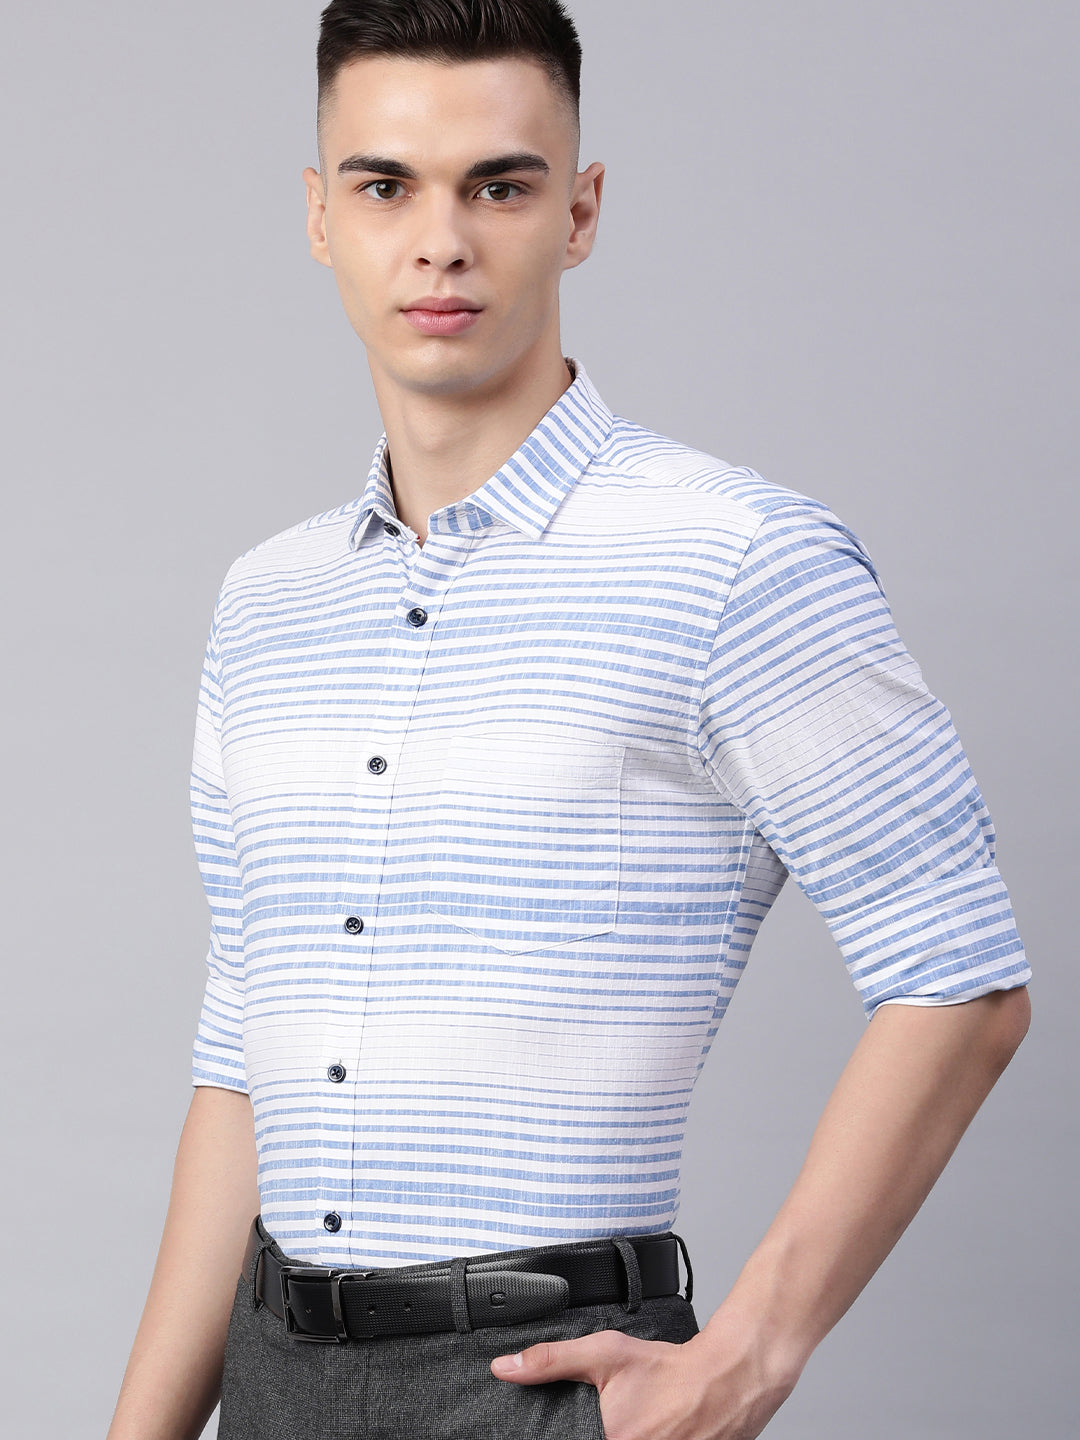 5thanfold Men's Pure Cotton Formal Full Sleeve Striped Blue Slim Fit Shirt